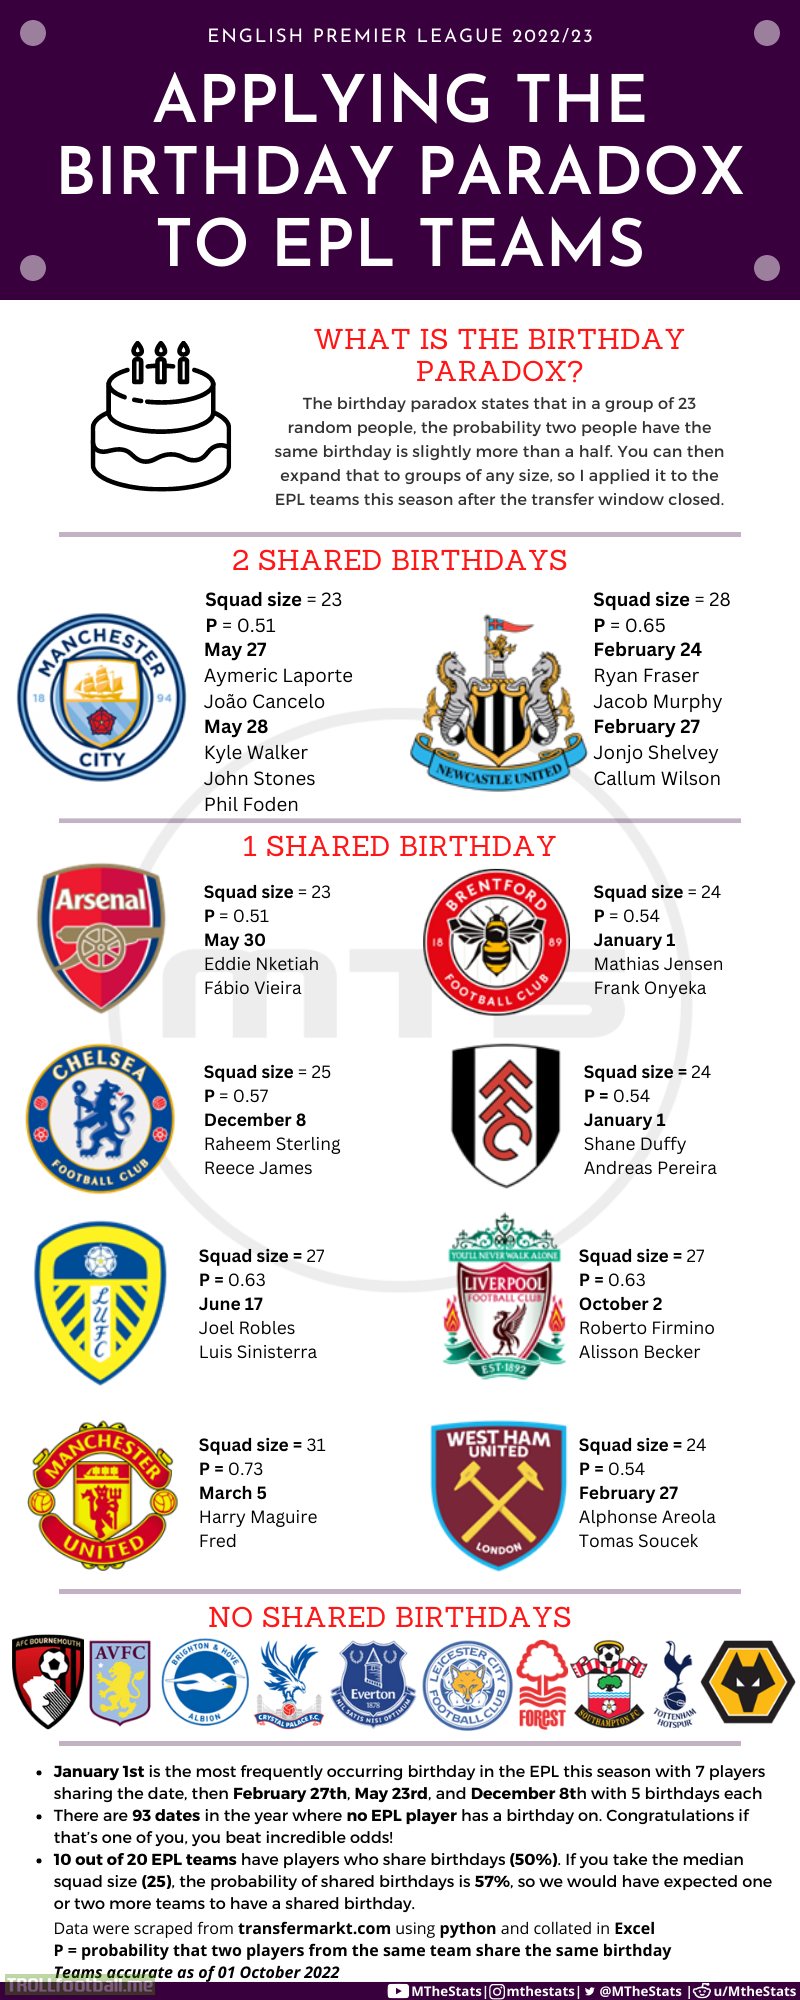 Applying the birthday paradox to the English Premier League squads 2022-23 (re-upload)